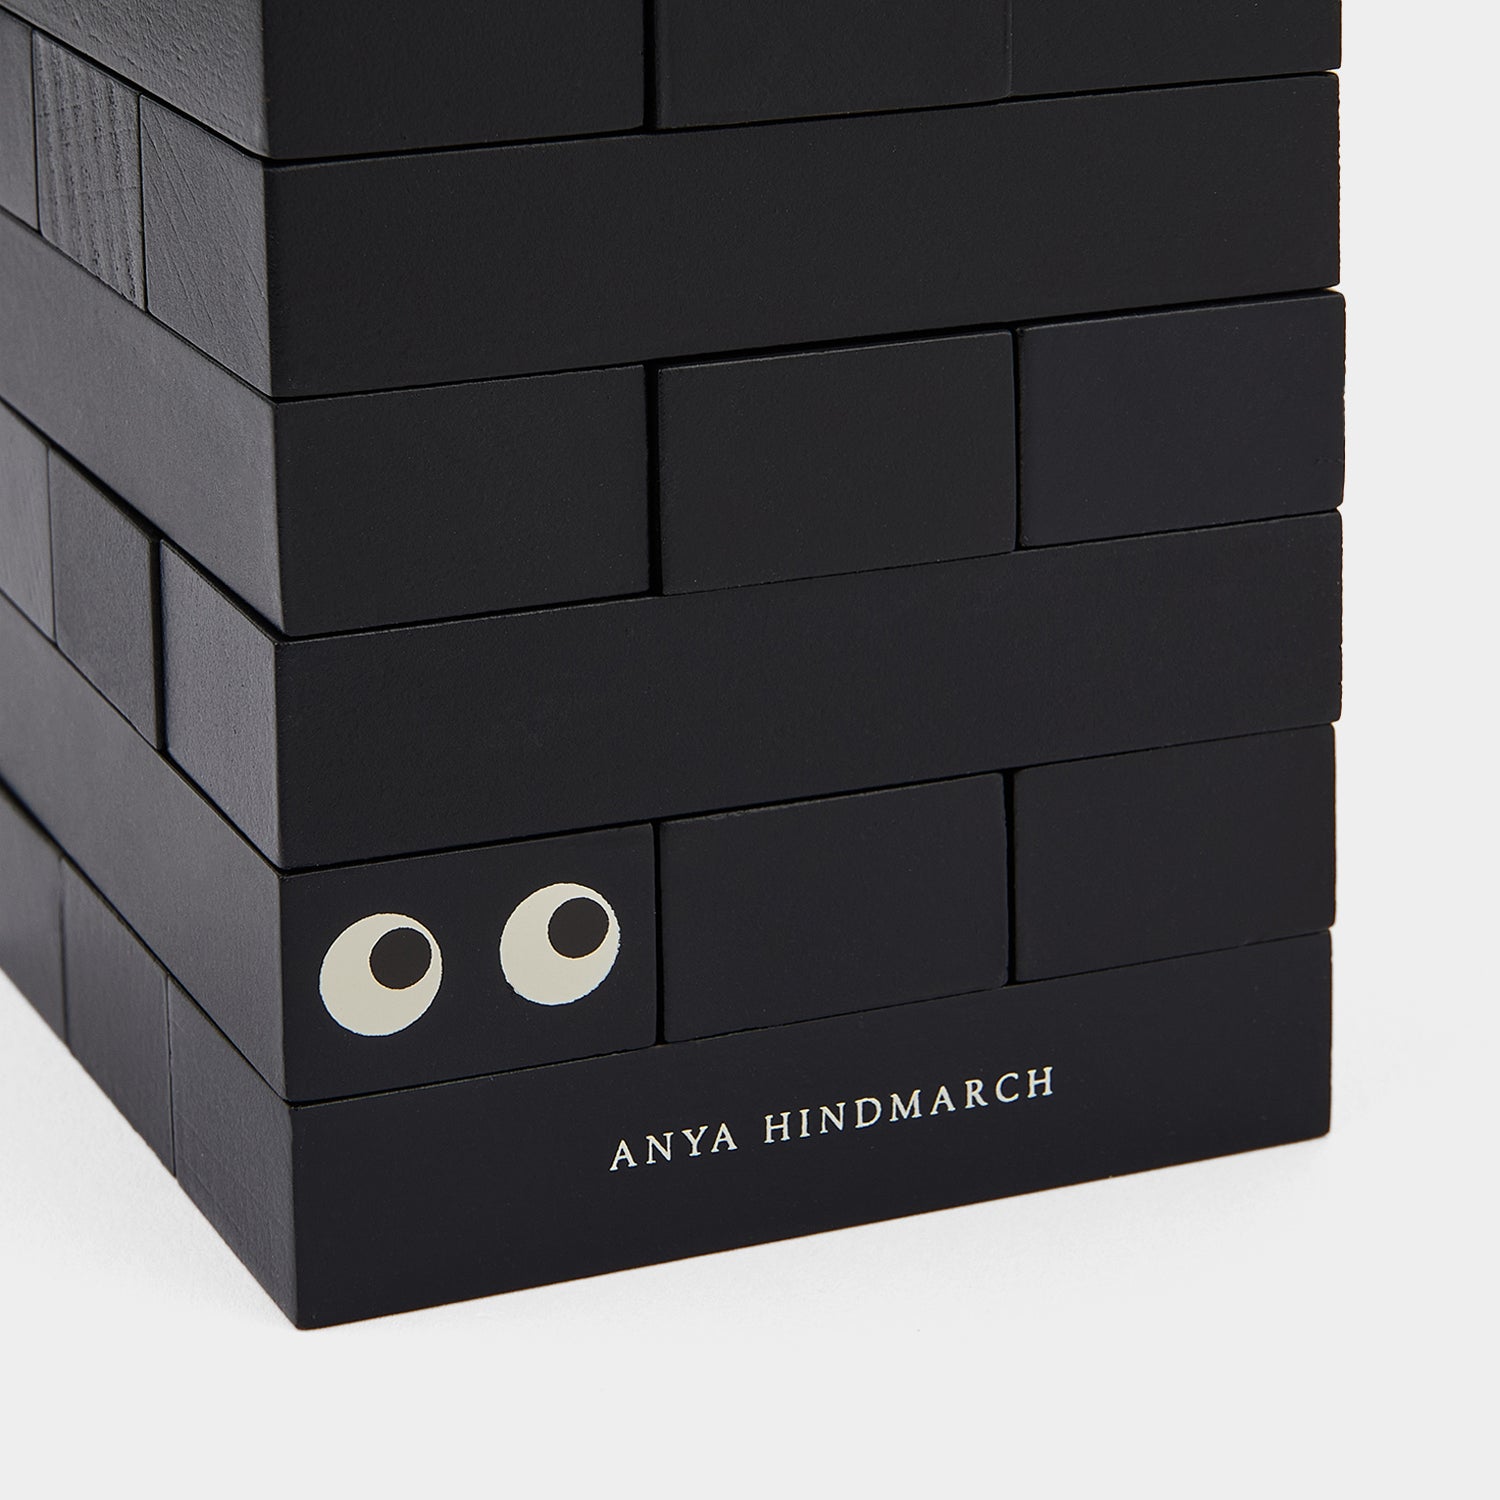 Look Out Tower -

                  
                    Wood in Black -
                  

                  Anya Hindmarch EU
